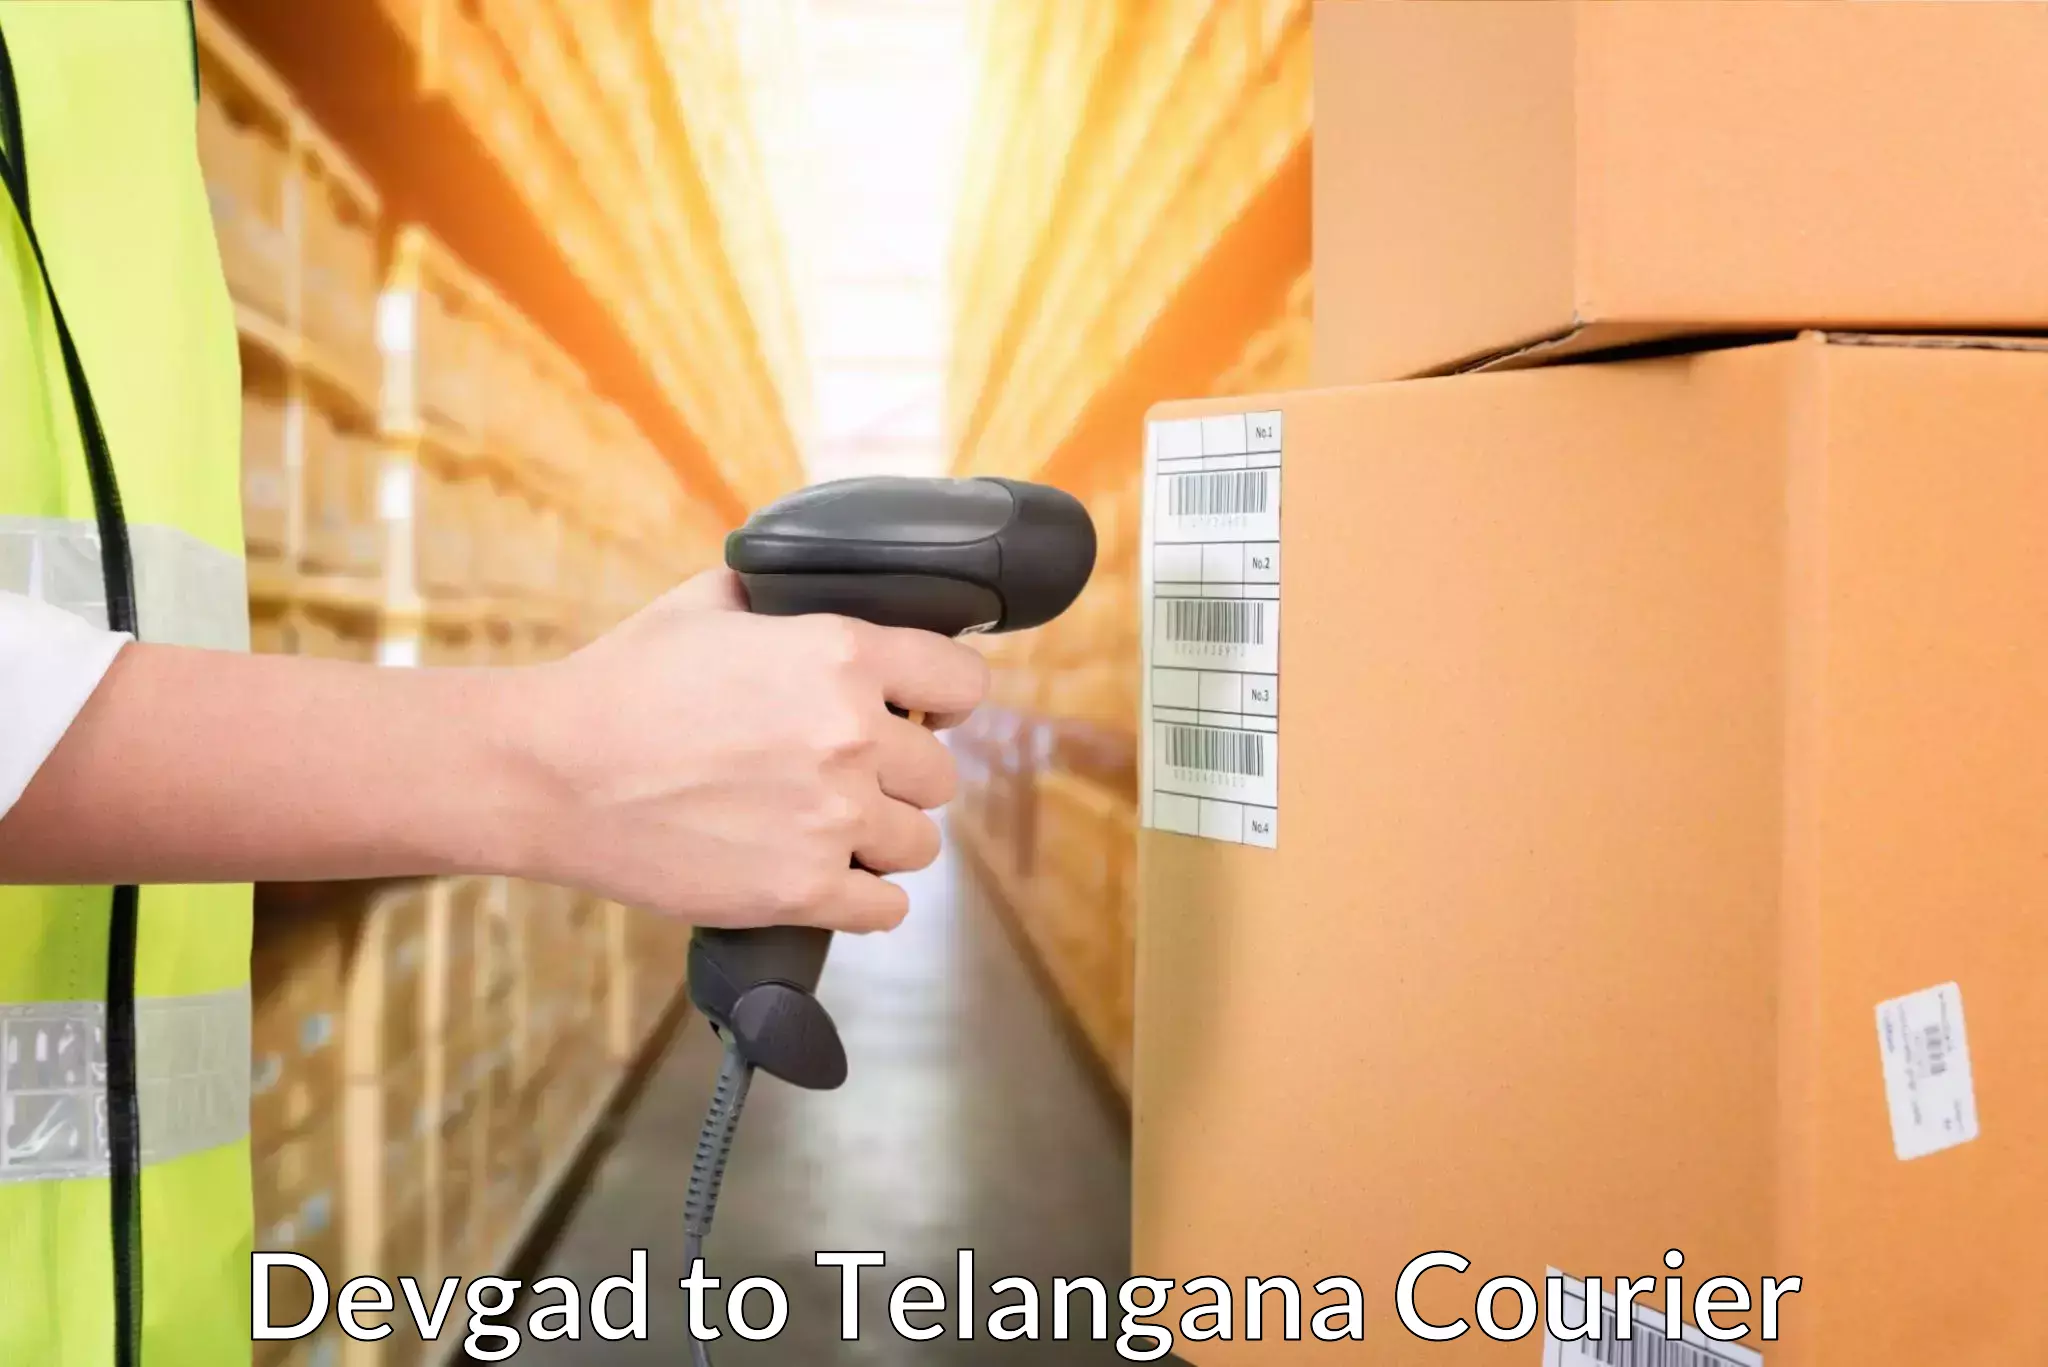 Express delivery capabilities Devgad to Atmakur Wanaparthy